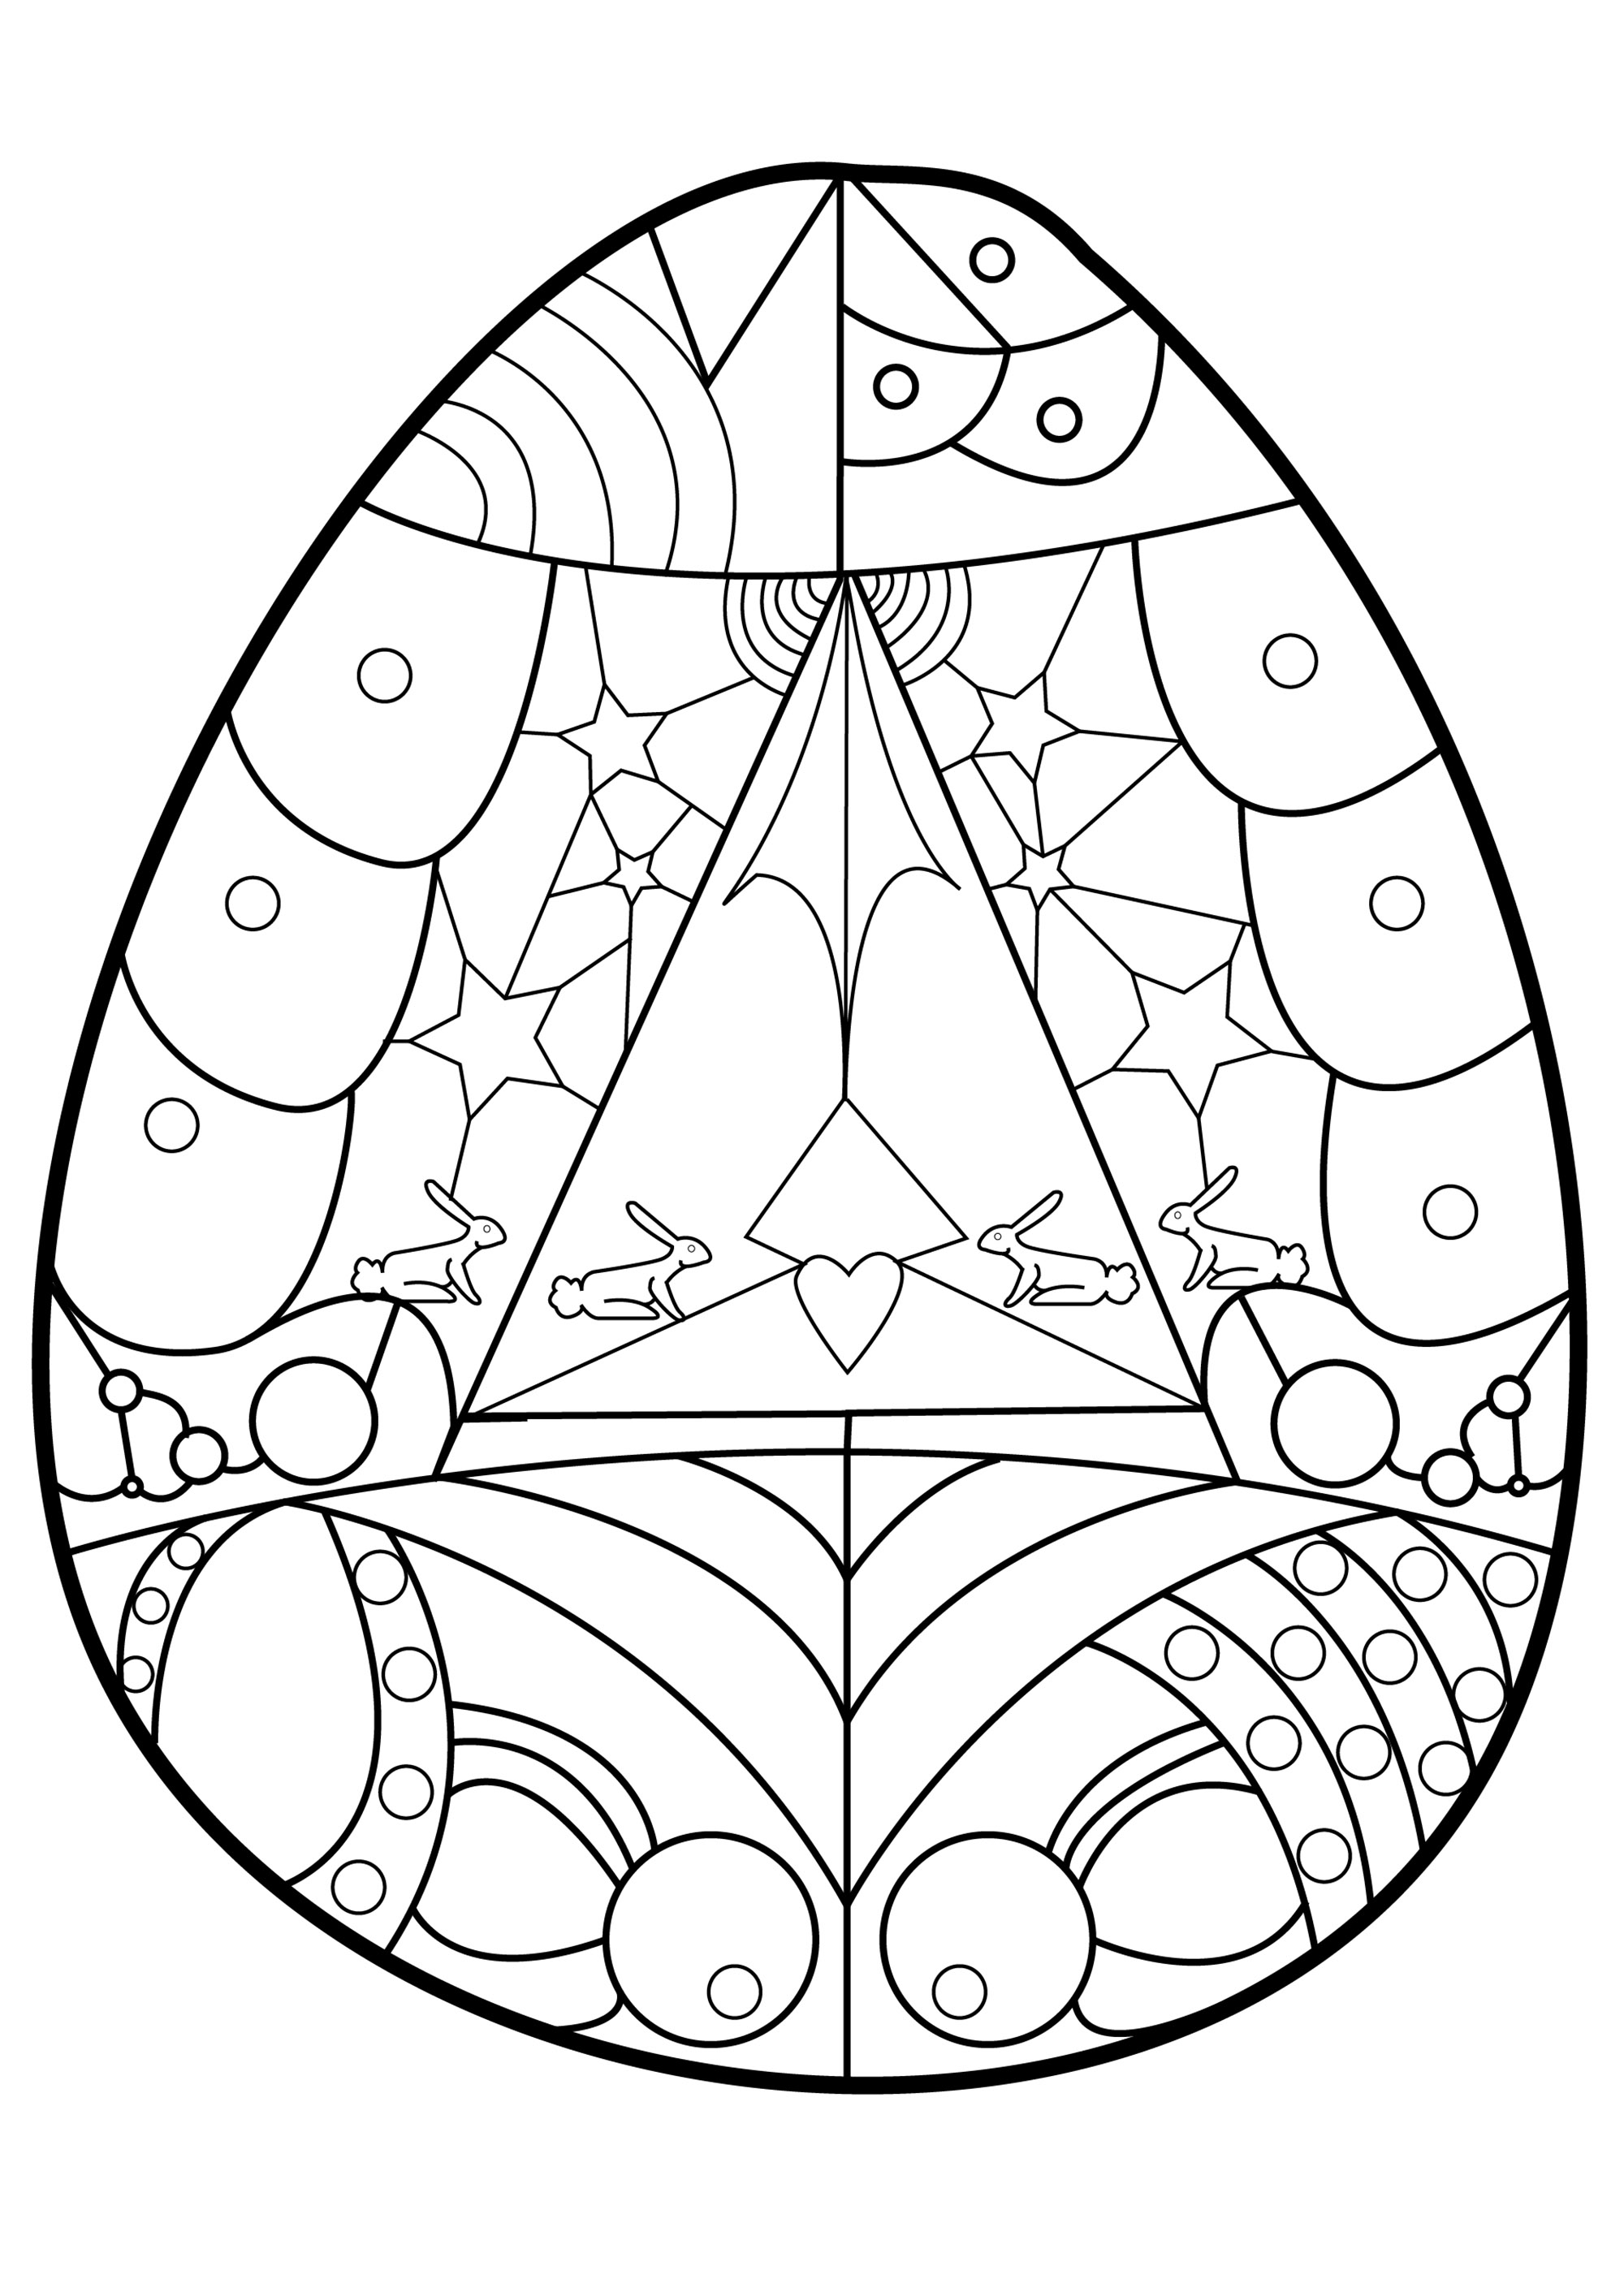 Various geometric shapes and patterns to color in this pretty Easter egg